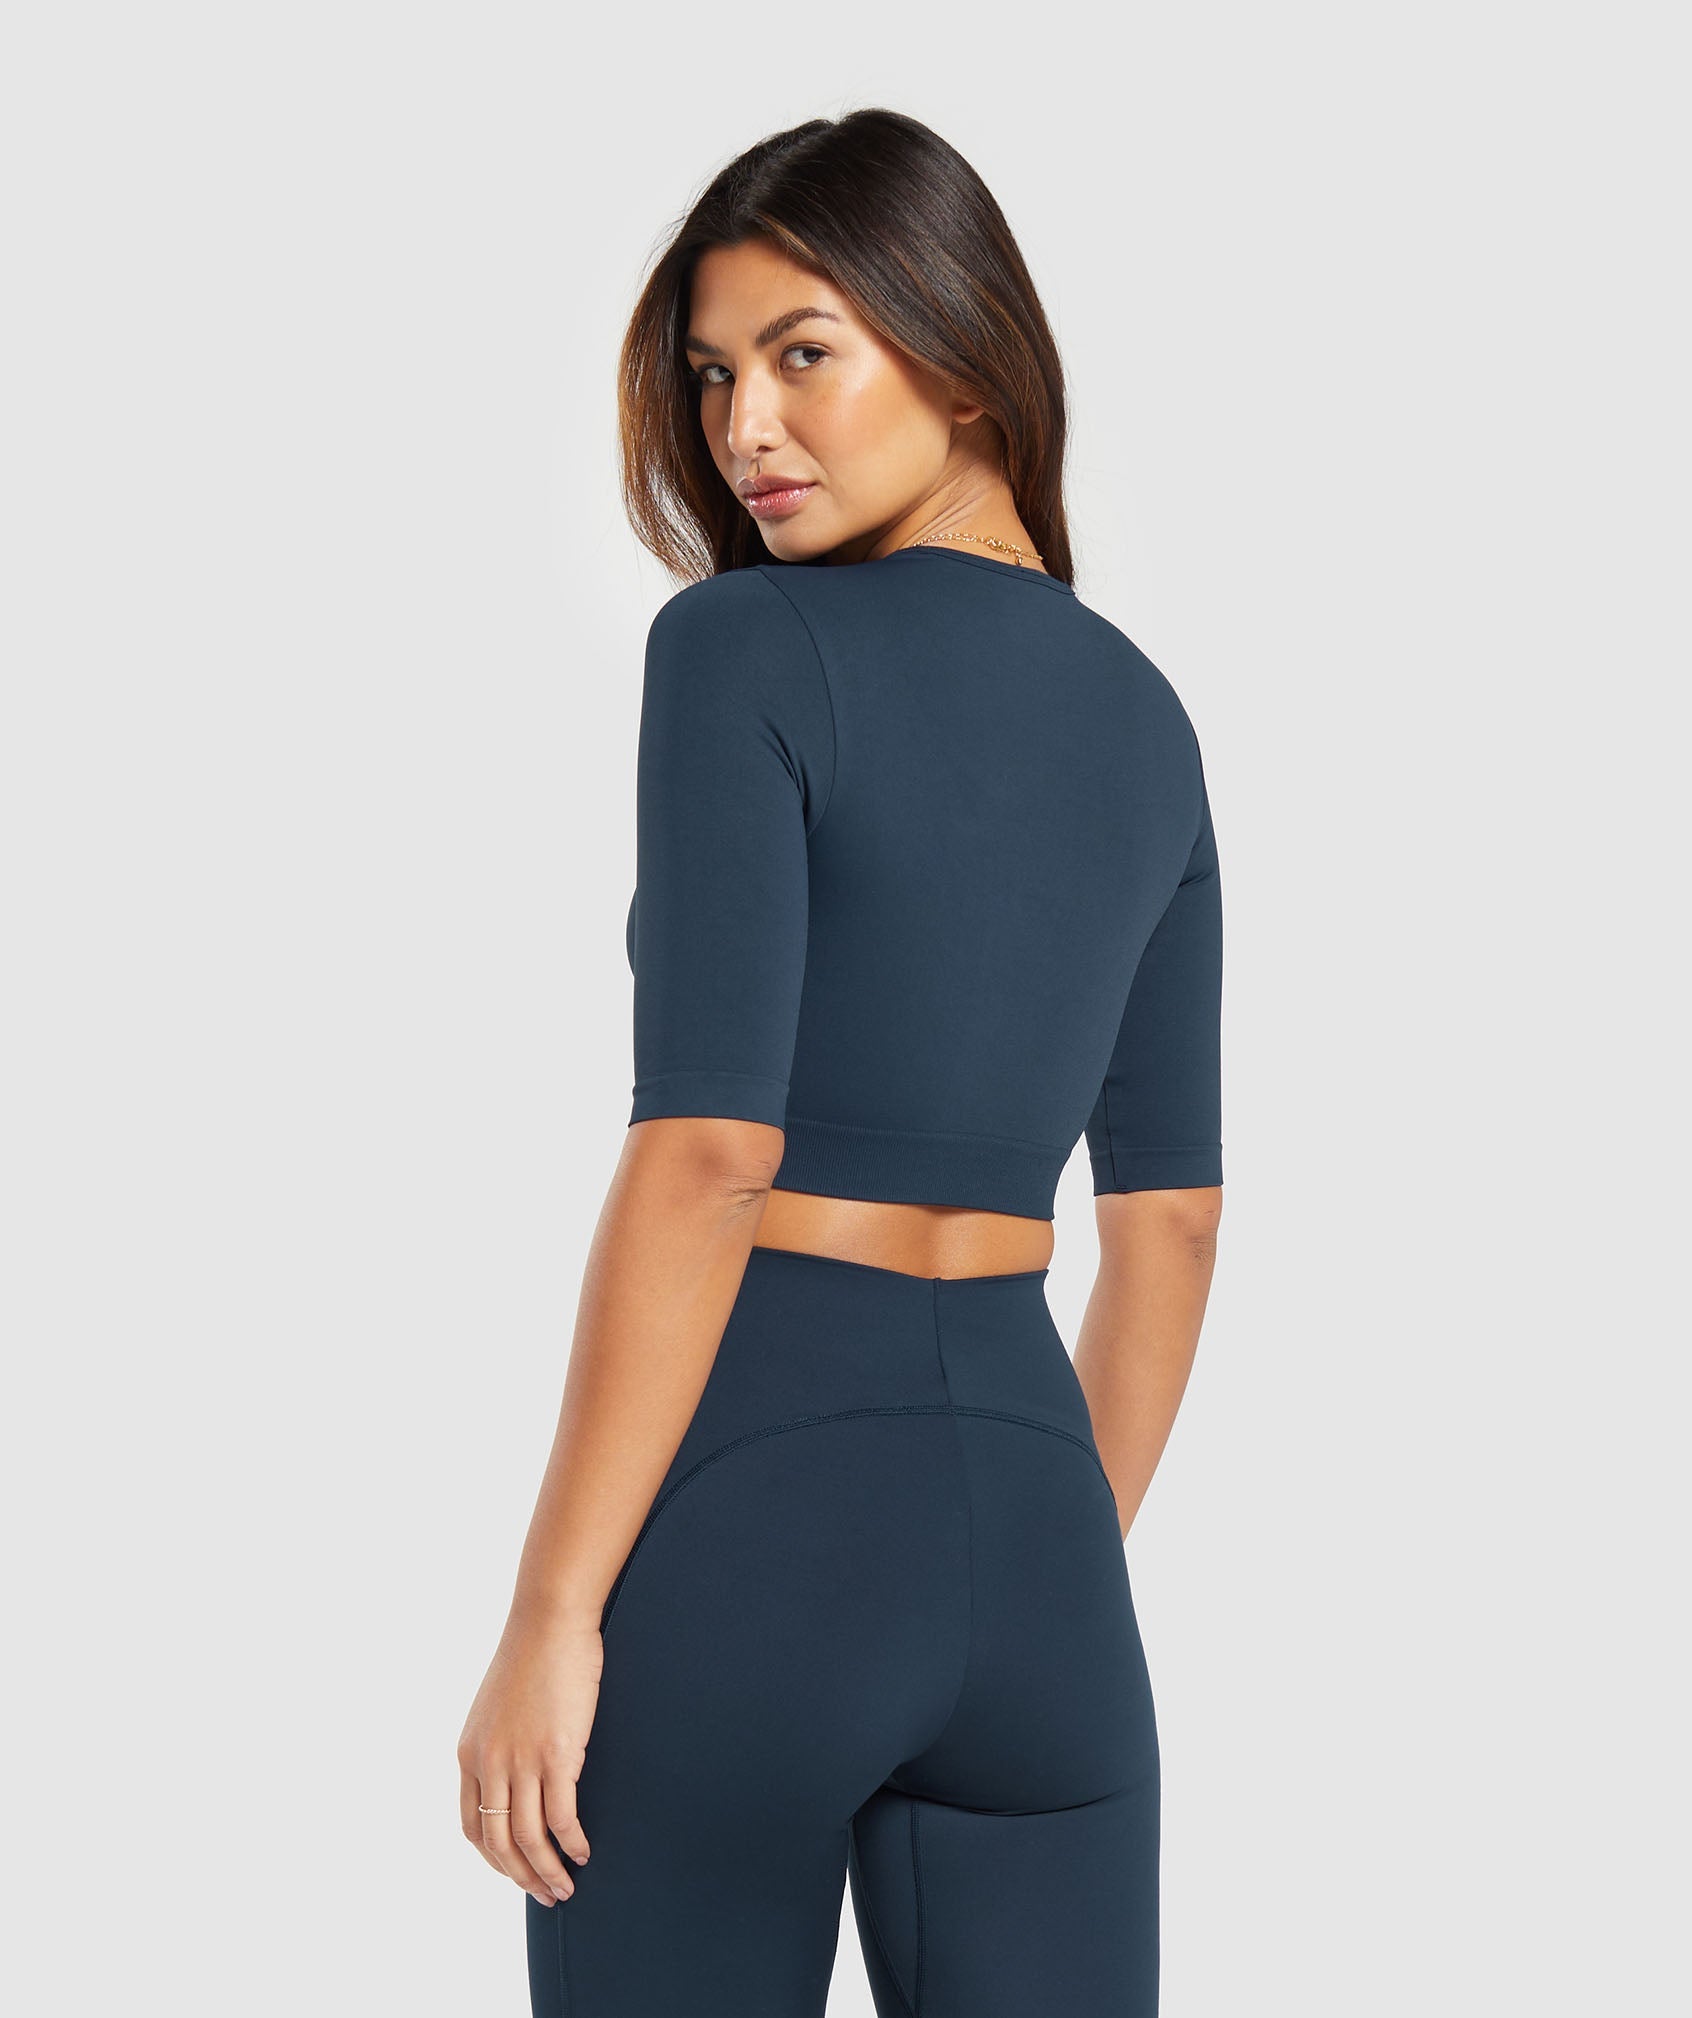 Everyday Seamless Crop Top in Navy - view 2